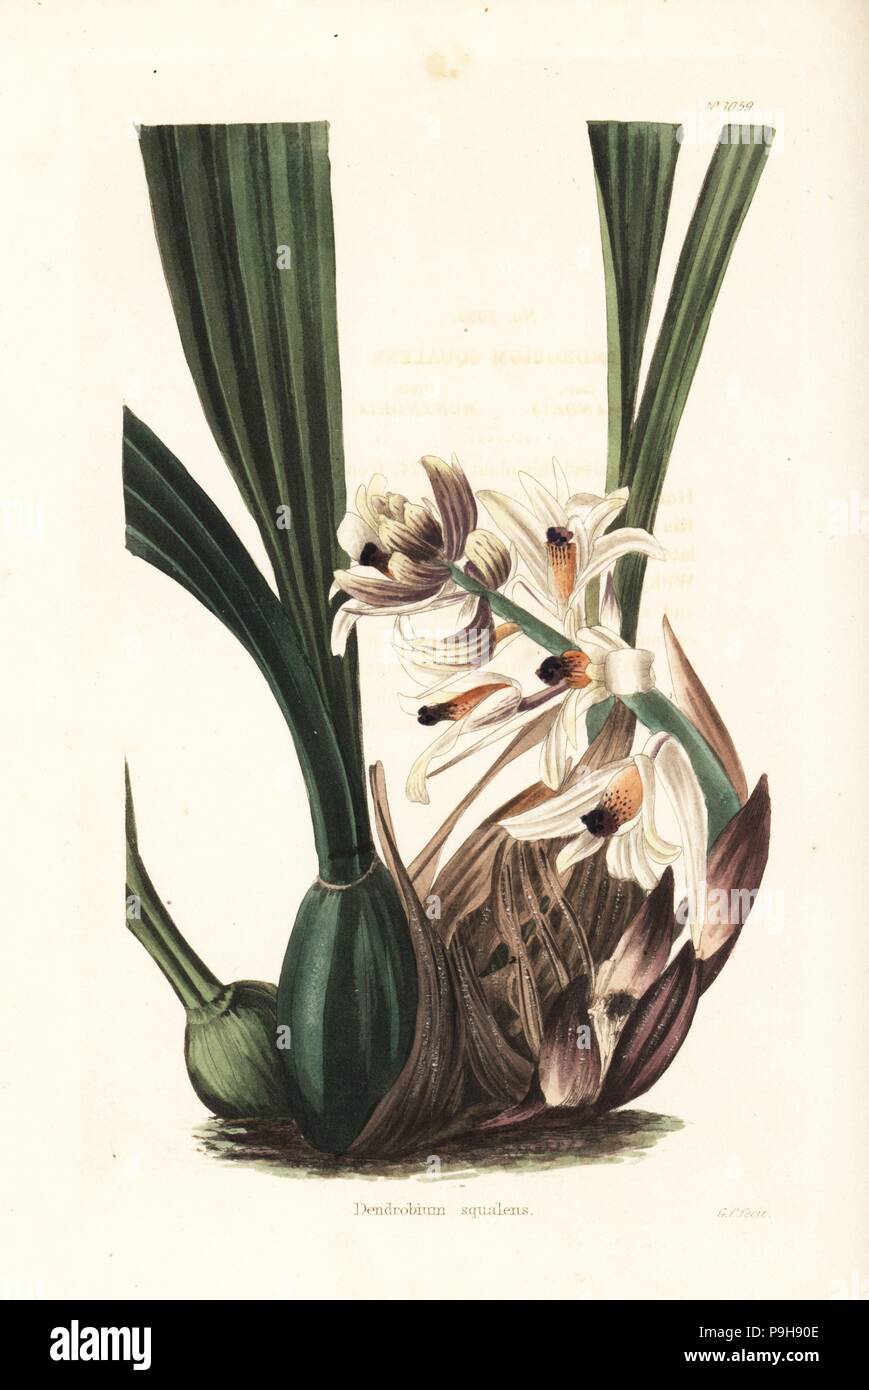 Xylobium squalens orchid (Dendrobium squalens). Handcoloured copperplate engraving by George Cooke from Conrad Loddiges' Botanical Cabinet, Hackney, 1825. Stock Photo